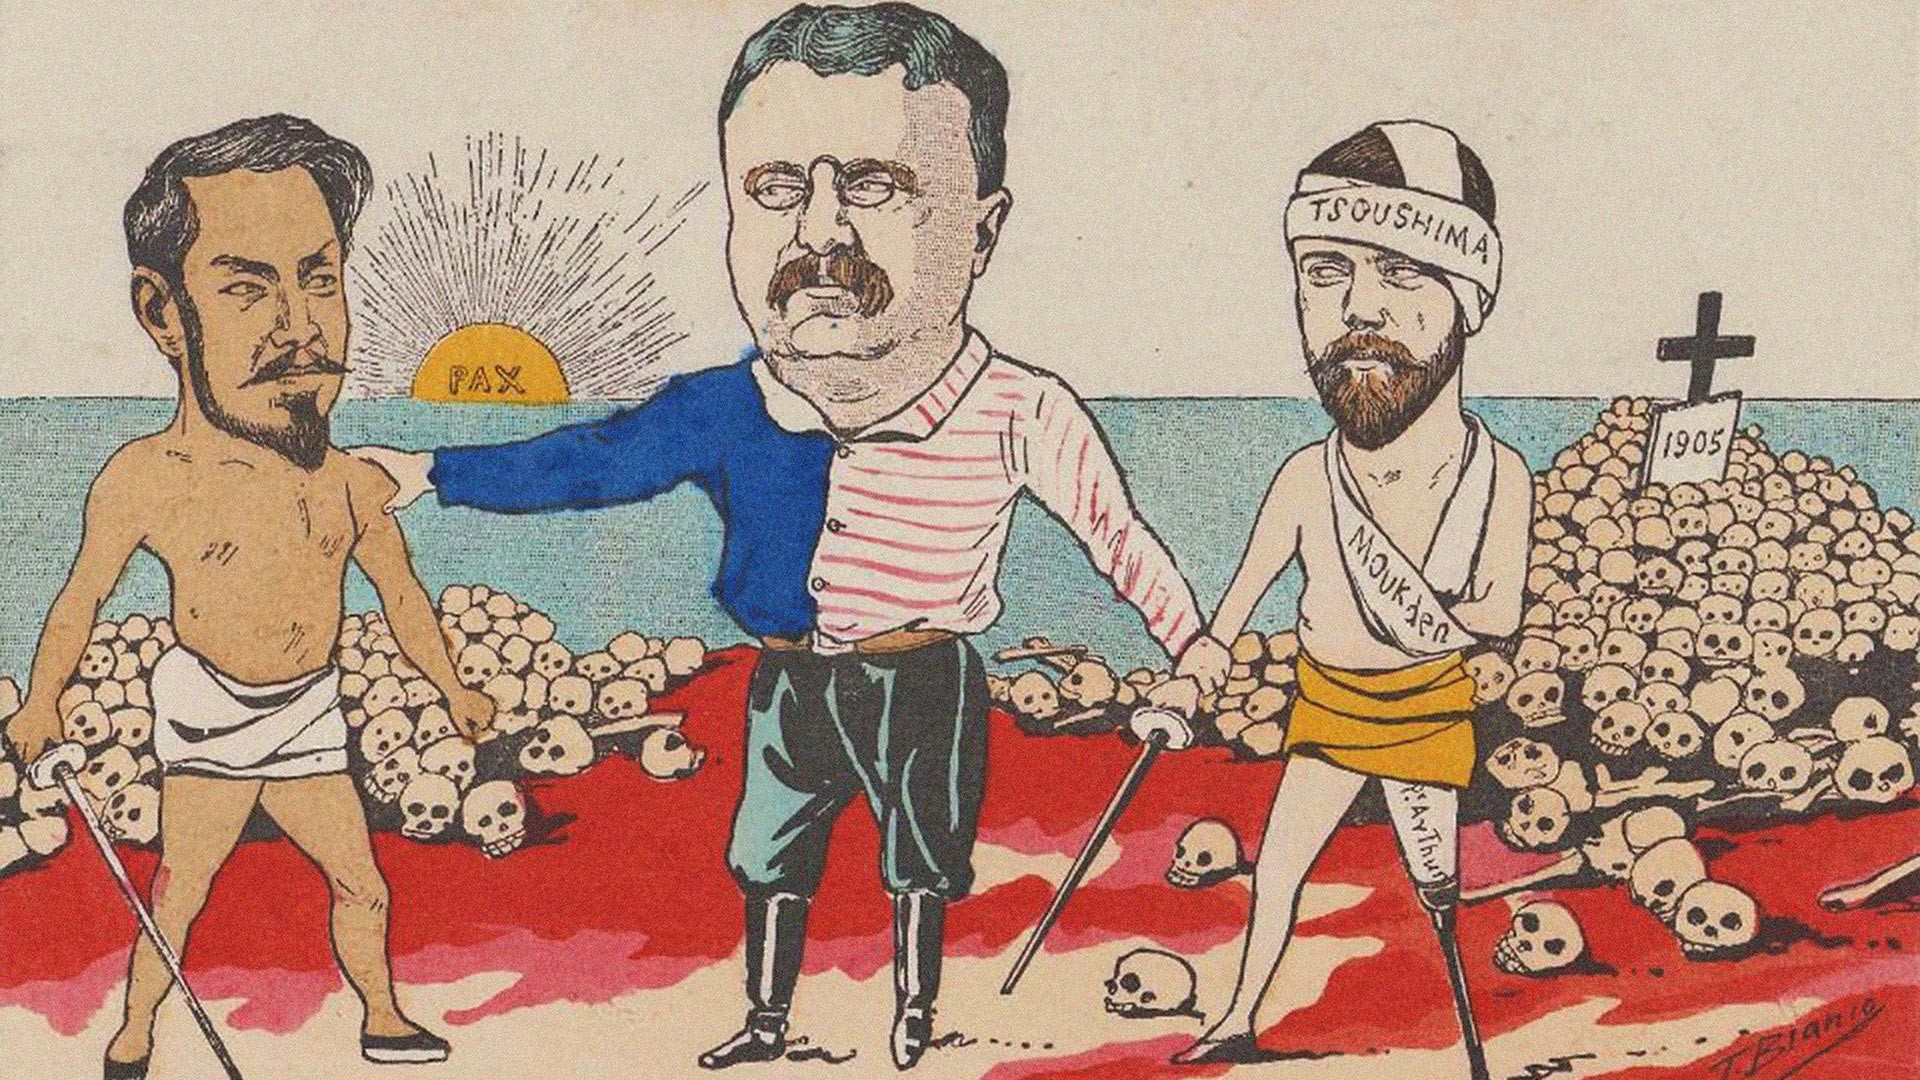 A caricature on the Treaty of Portsmouth, 1905.